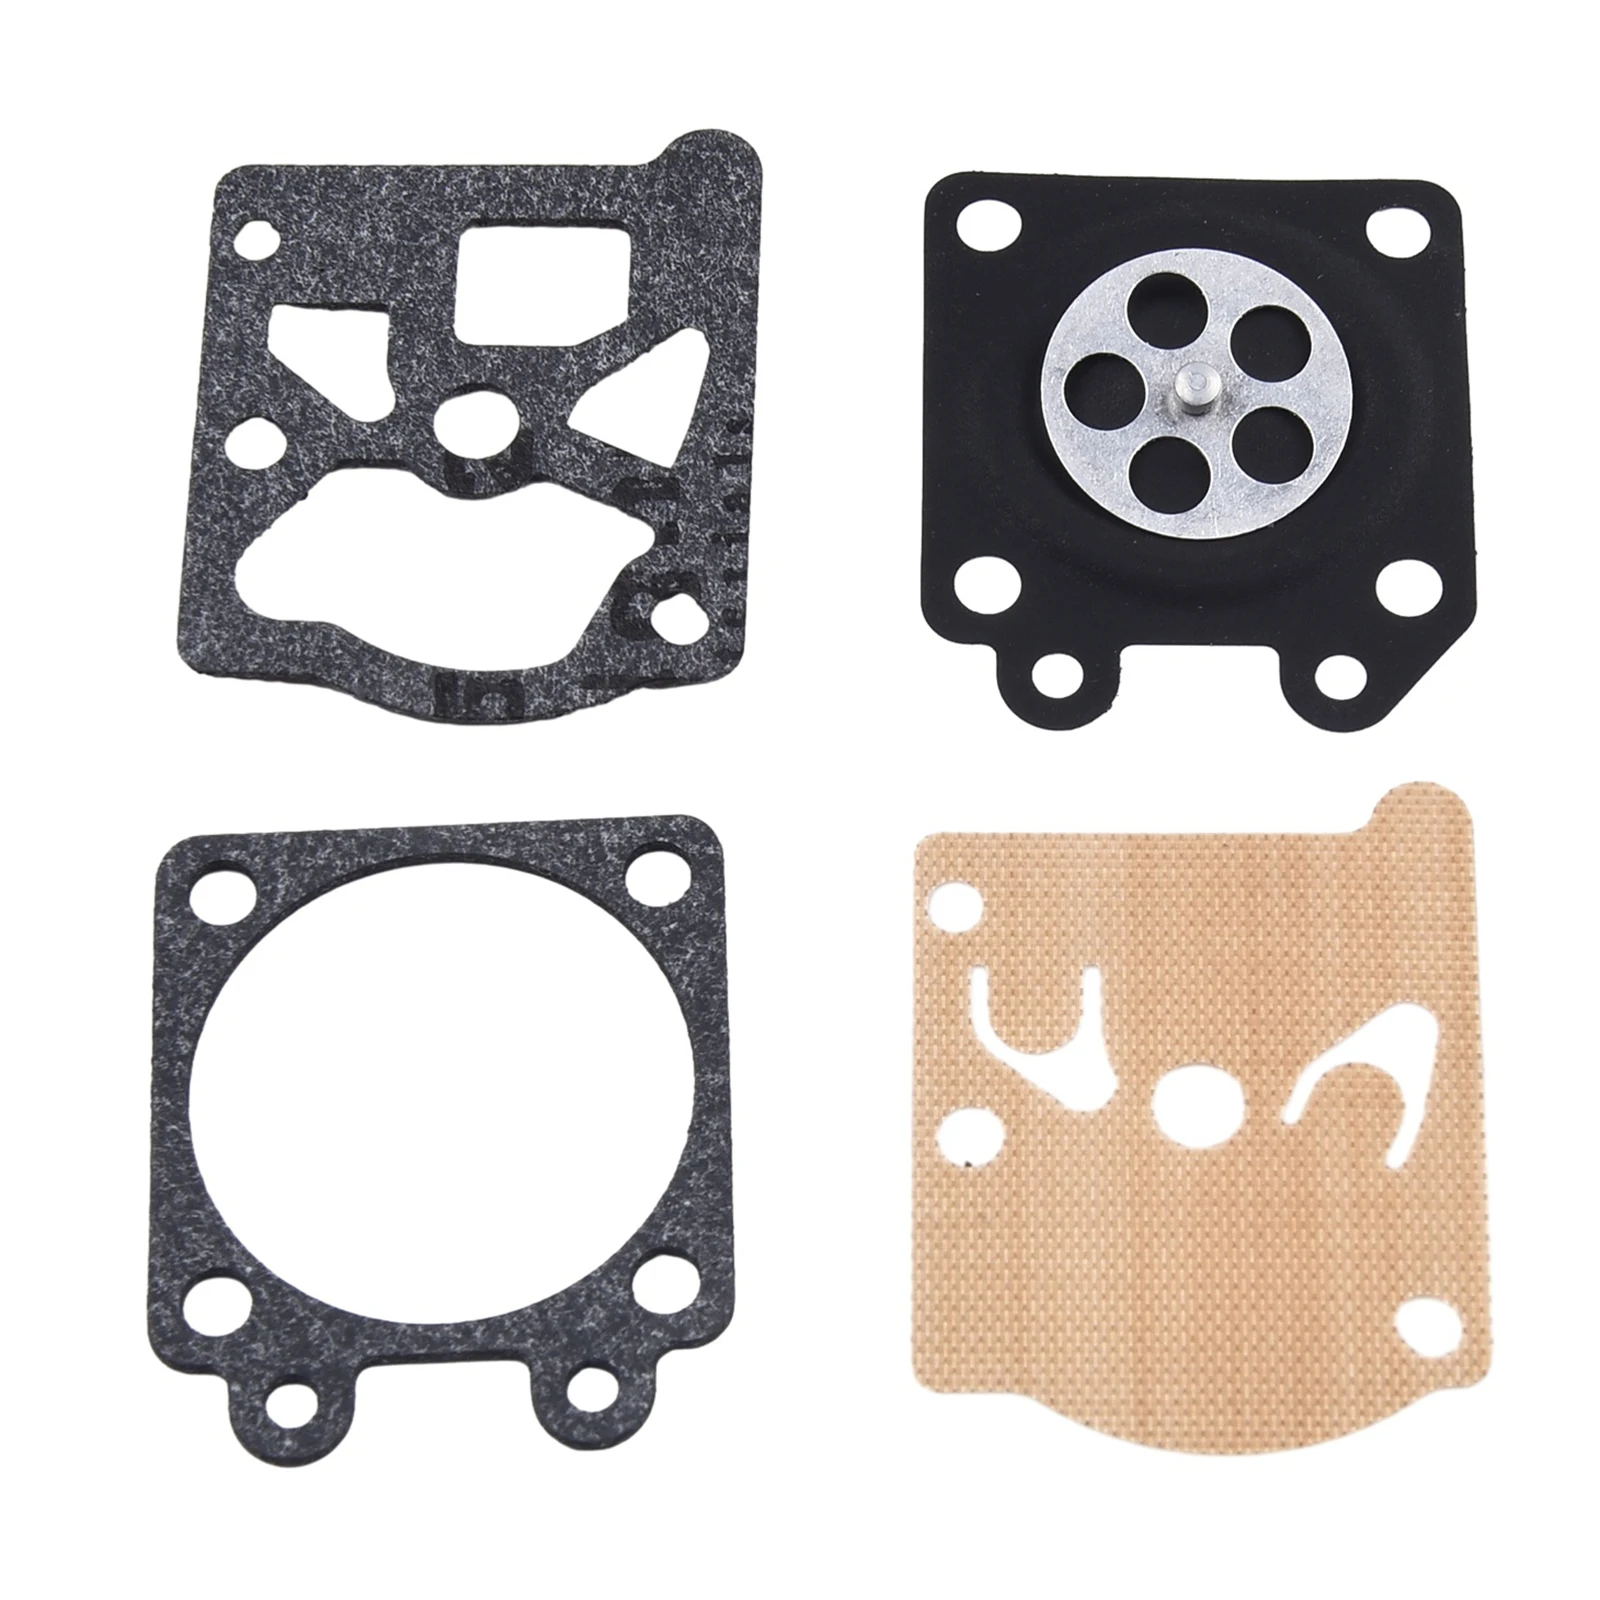 for connect trimble 5700 5800 r7 r8 host to pc cable 32960 brand new transfer cable 32960 Brand New Diaphragm Accessories 1 Set 3800 5200 4500 5800 45CC 5200 58CC Carburetor Chain Saw Series Replacement